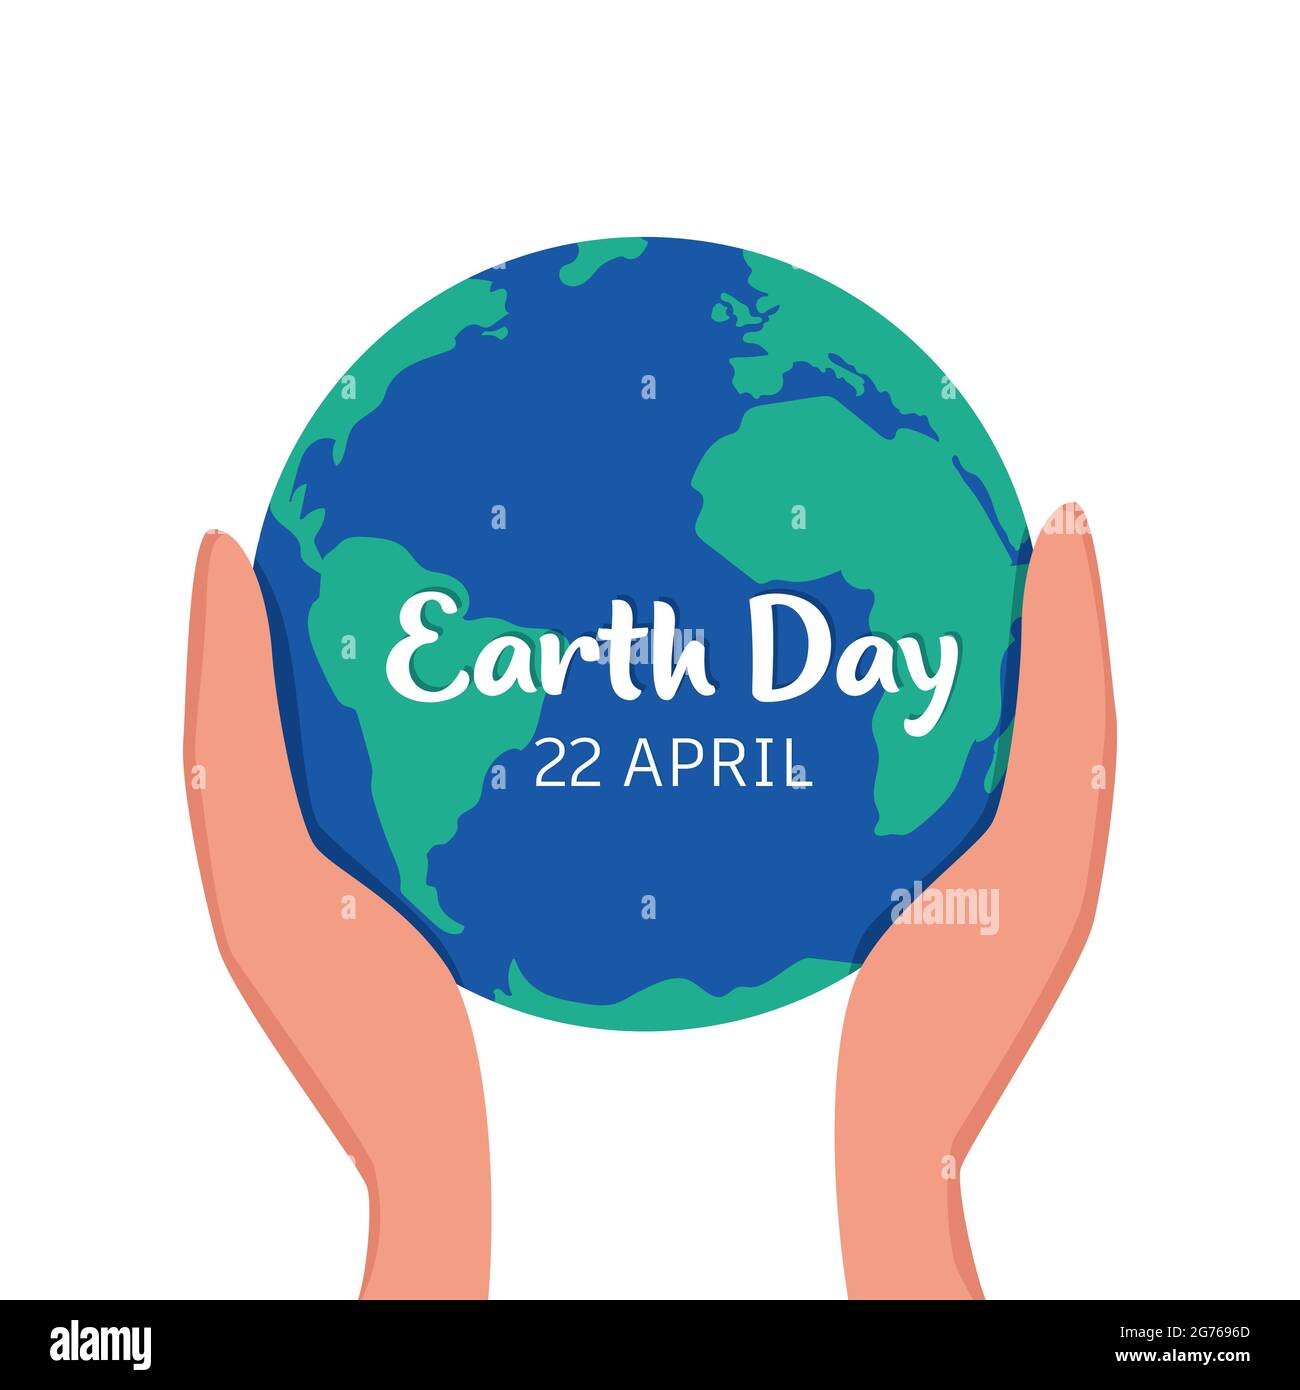 Planet Earth in caring hands. Happy Earth Day. 22 of April. Hands holding earth ball. Save the planet. Flat style vector illustration Stock Vector